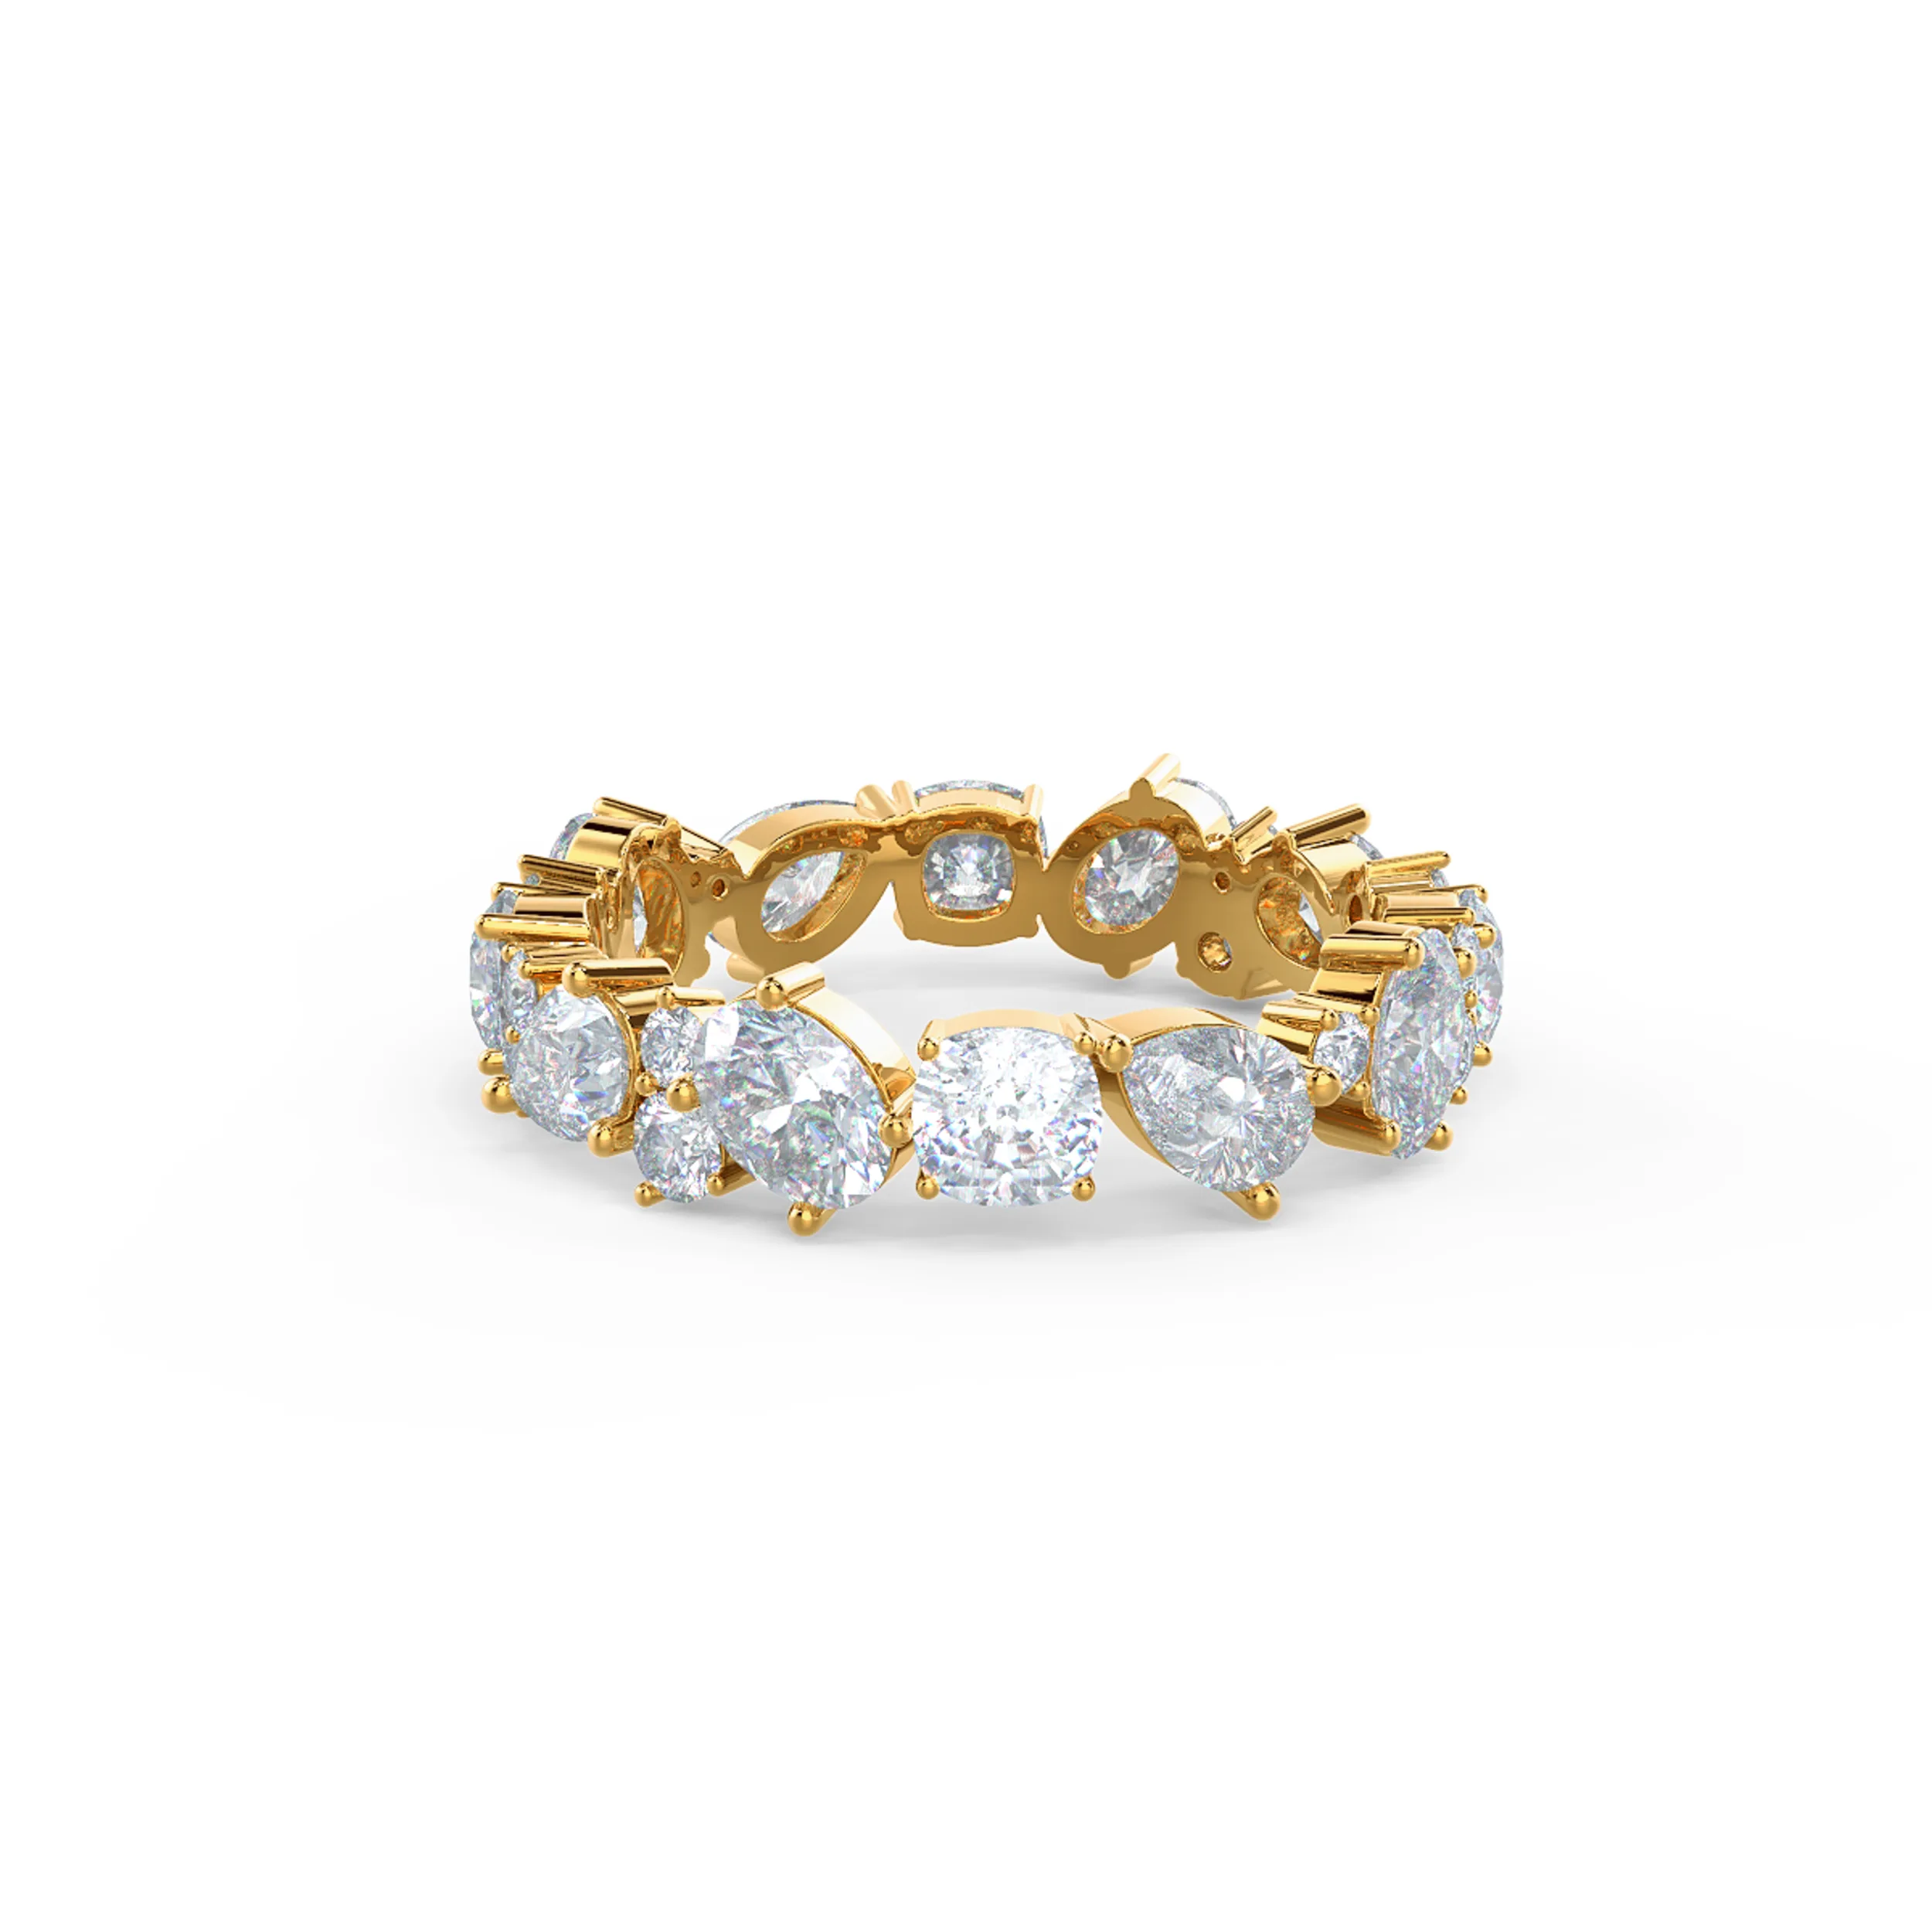 14k Yellow Gold Mary Eternity Band featuring 3.25 ctw Diamonds (Main View)